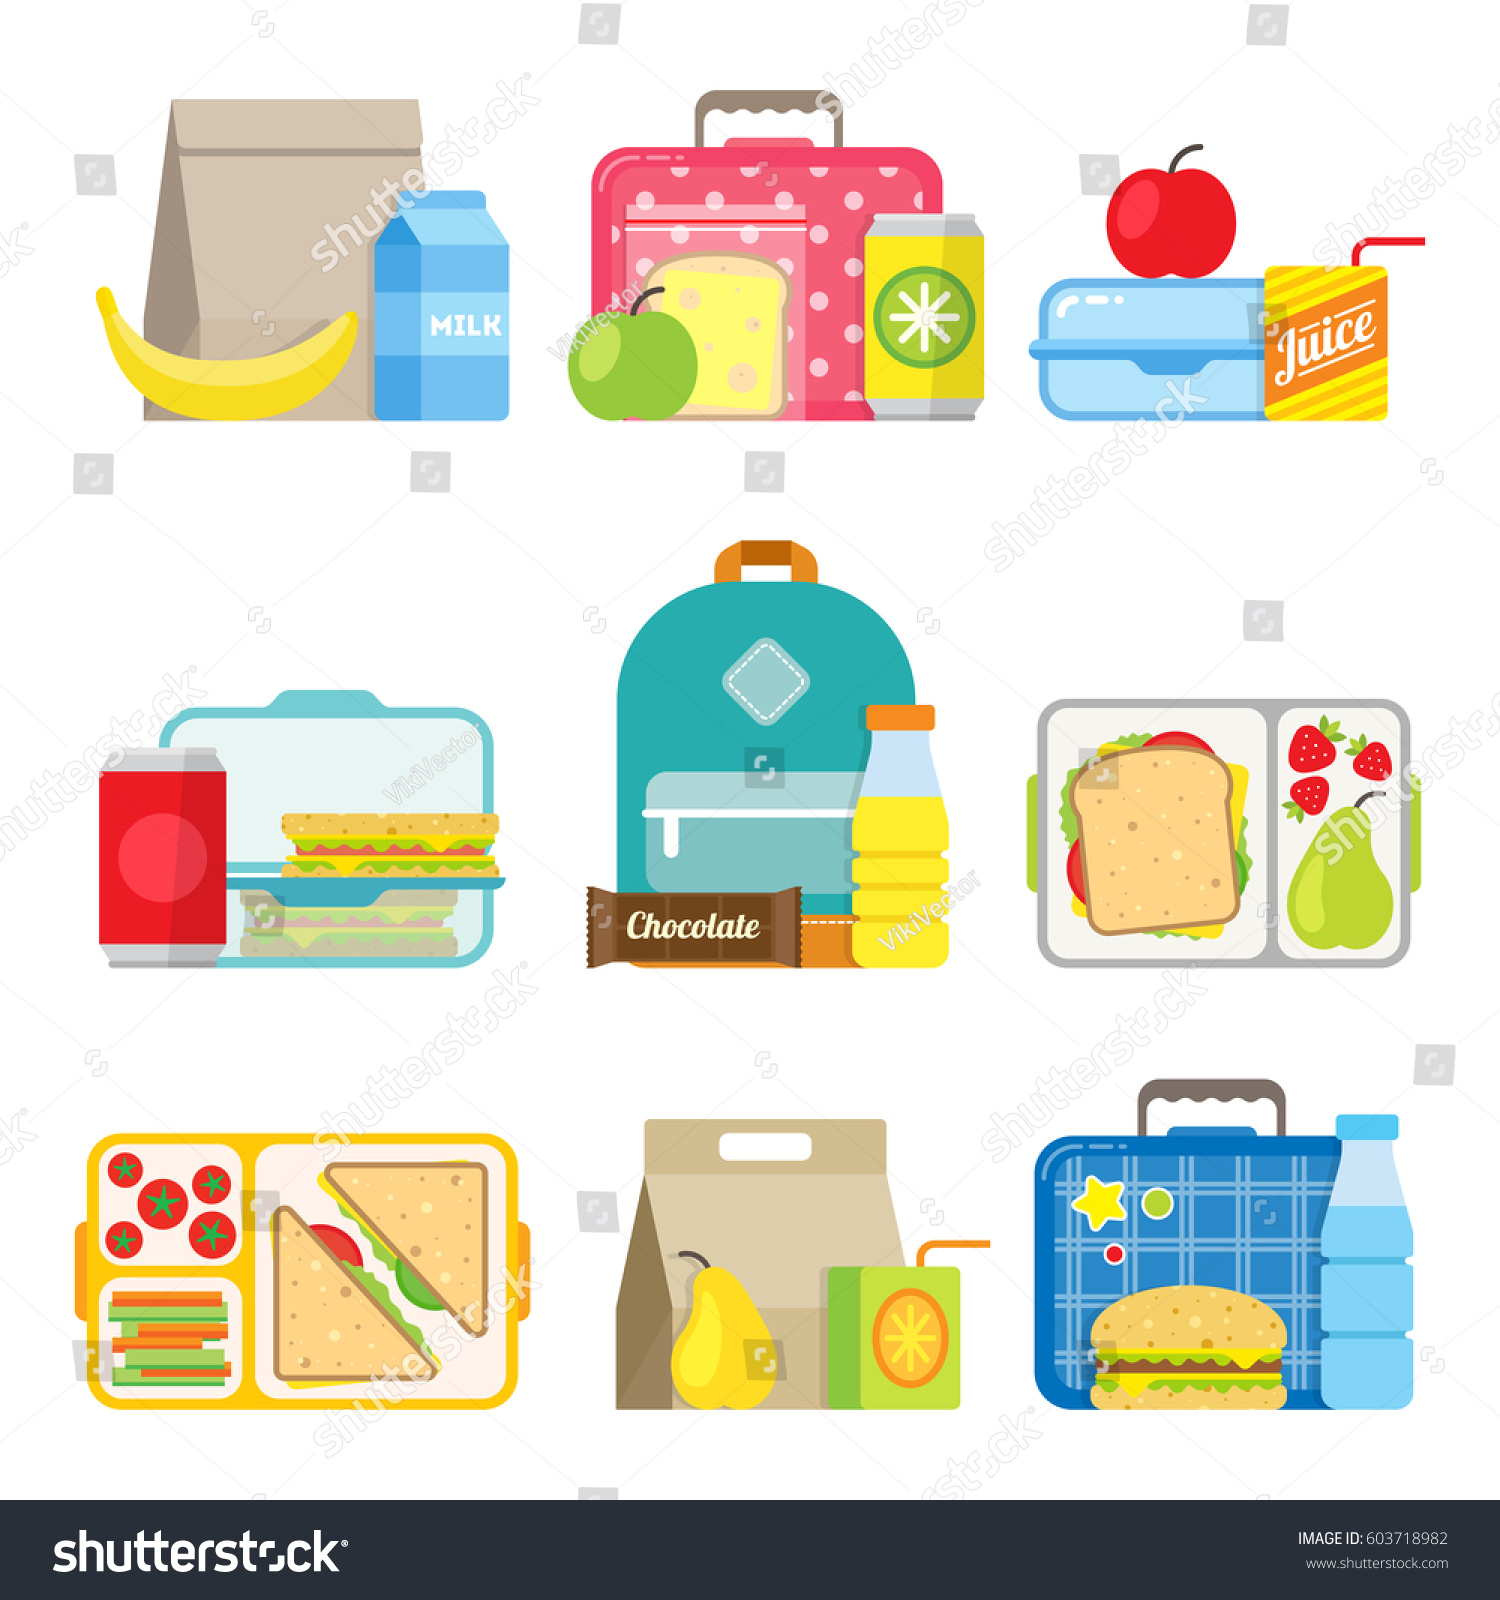 School lunch boxes set. Children's lunch bags and trays with hamburgers, soda, fruts and other food. Kids school lunches icons in flat style.